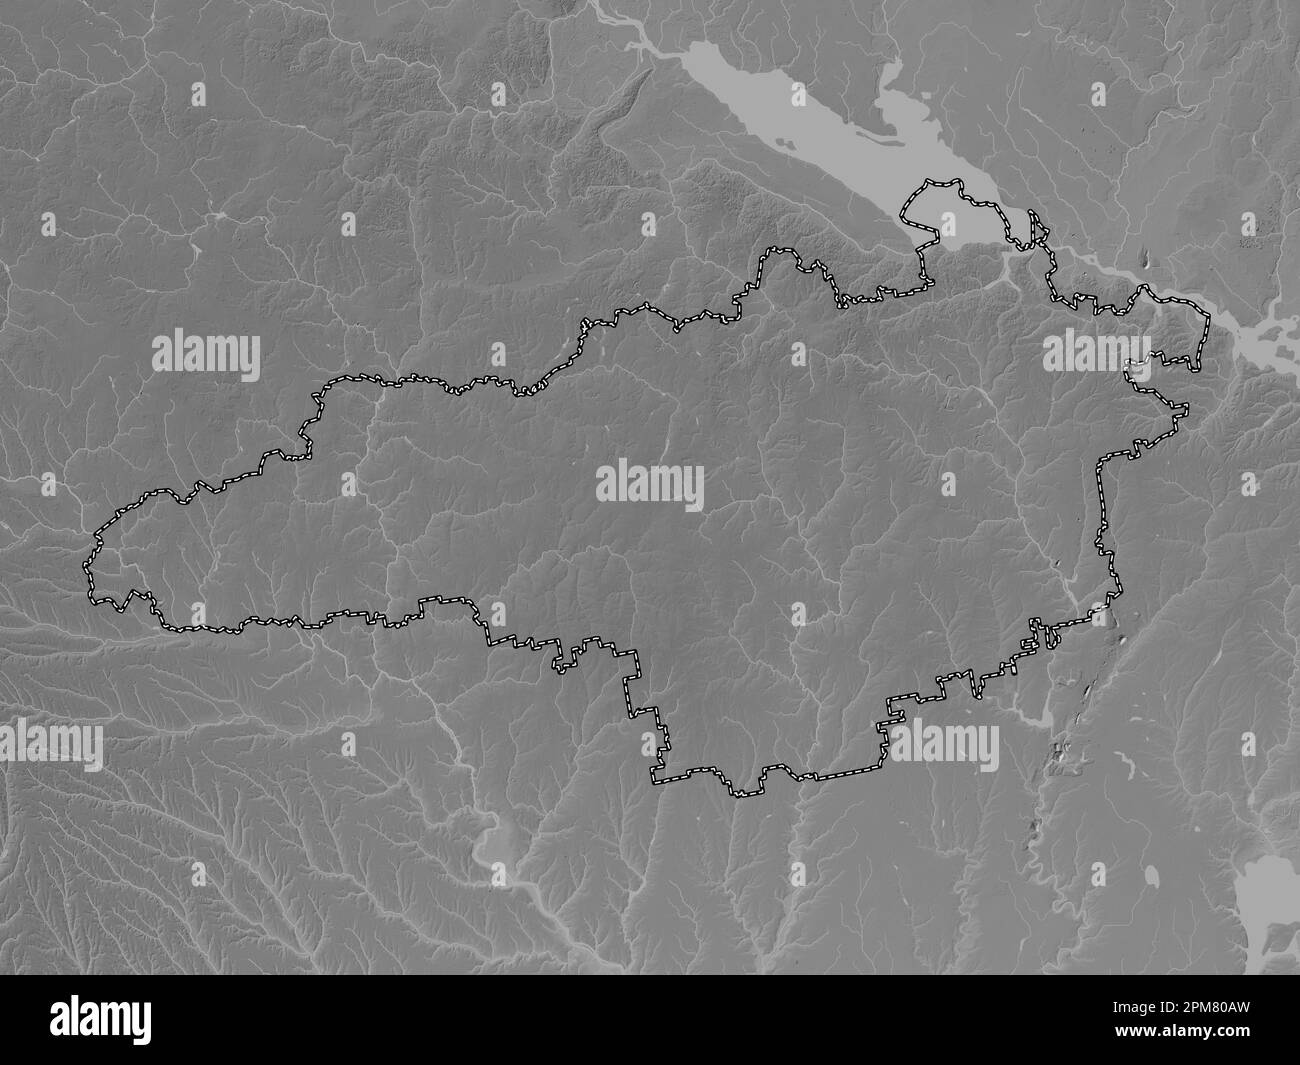 Kirovohrad, region of Ukraine. Grayscale elevation map with lakes and rivers Stock Photo